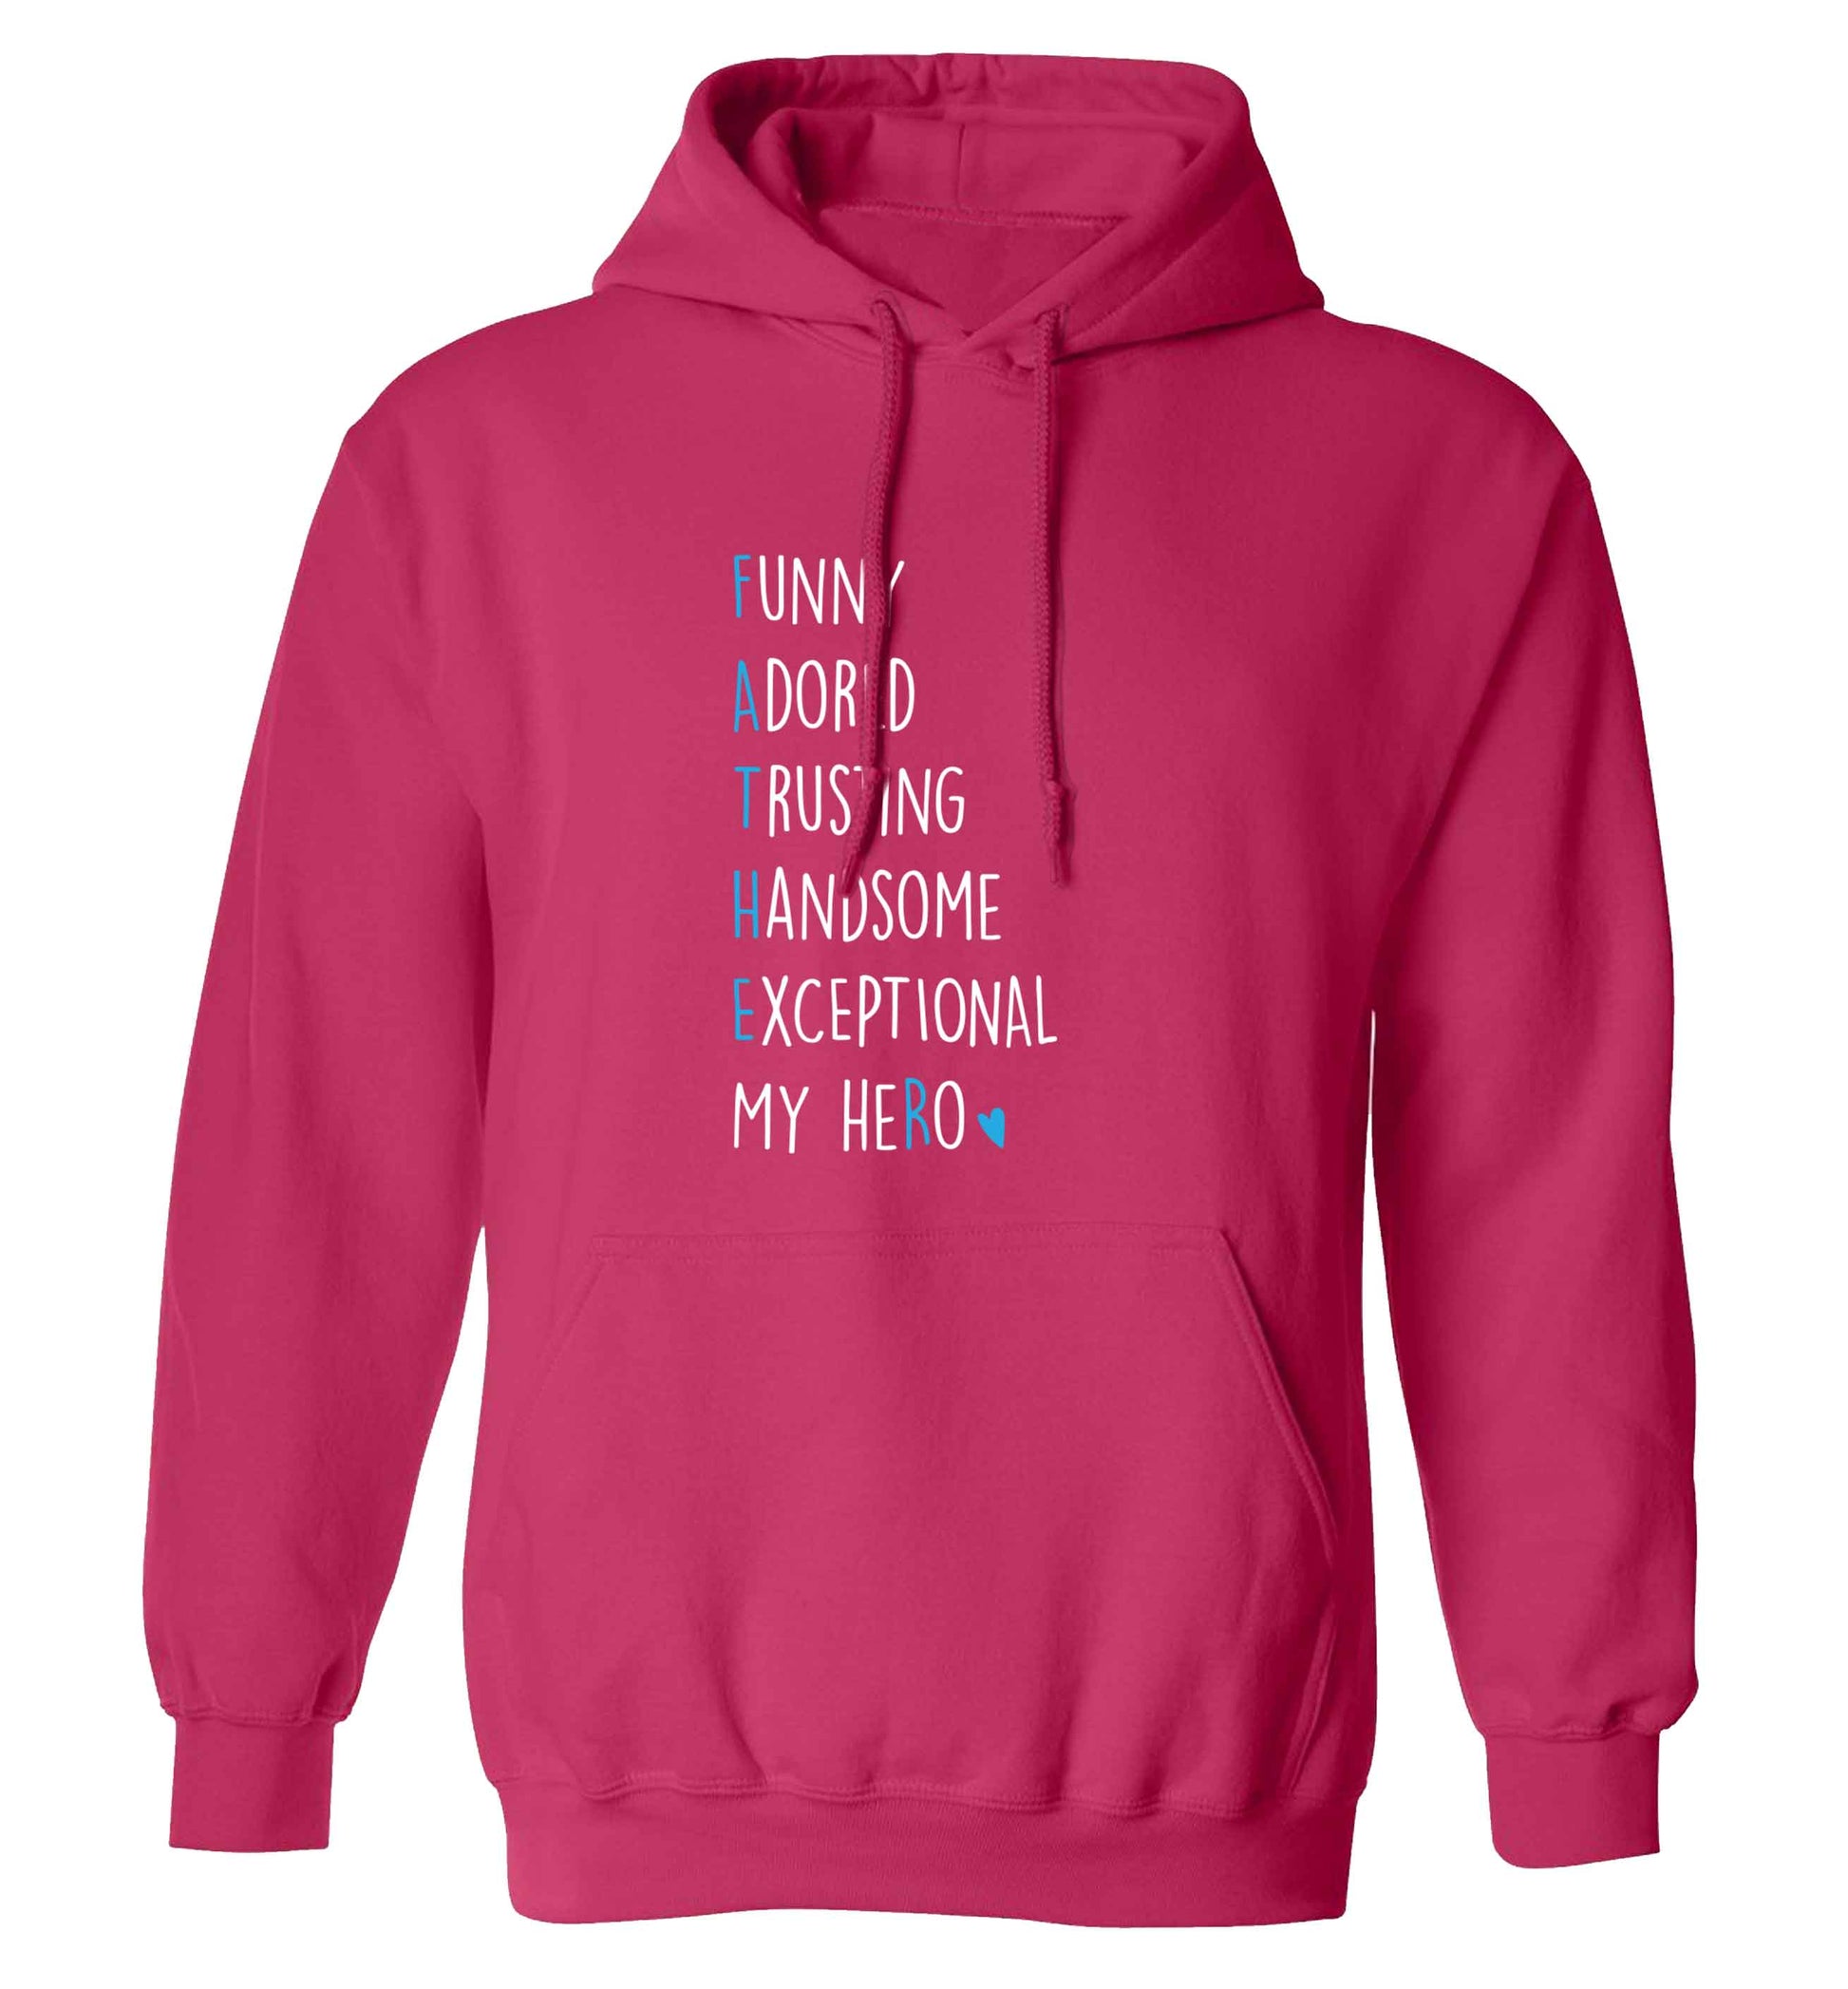 Father, funny adored trusting handsome exceptional my hero adults unisex pink hoodie 2XL